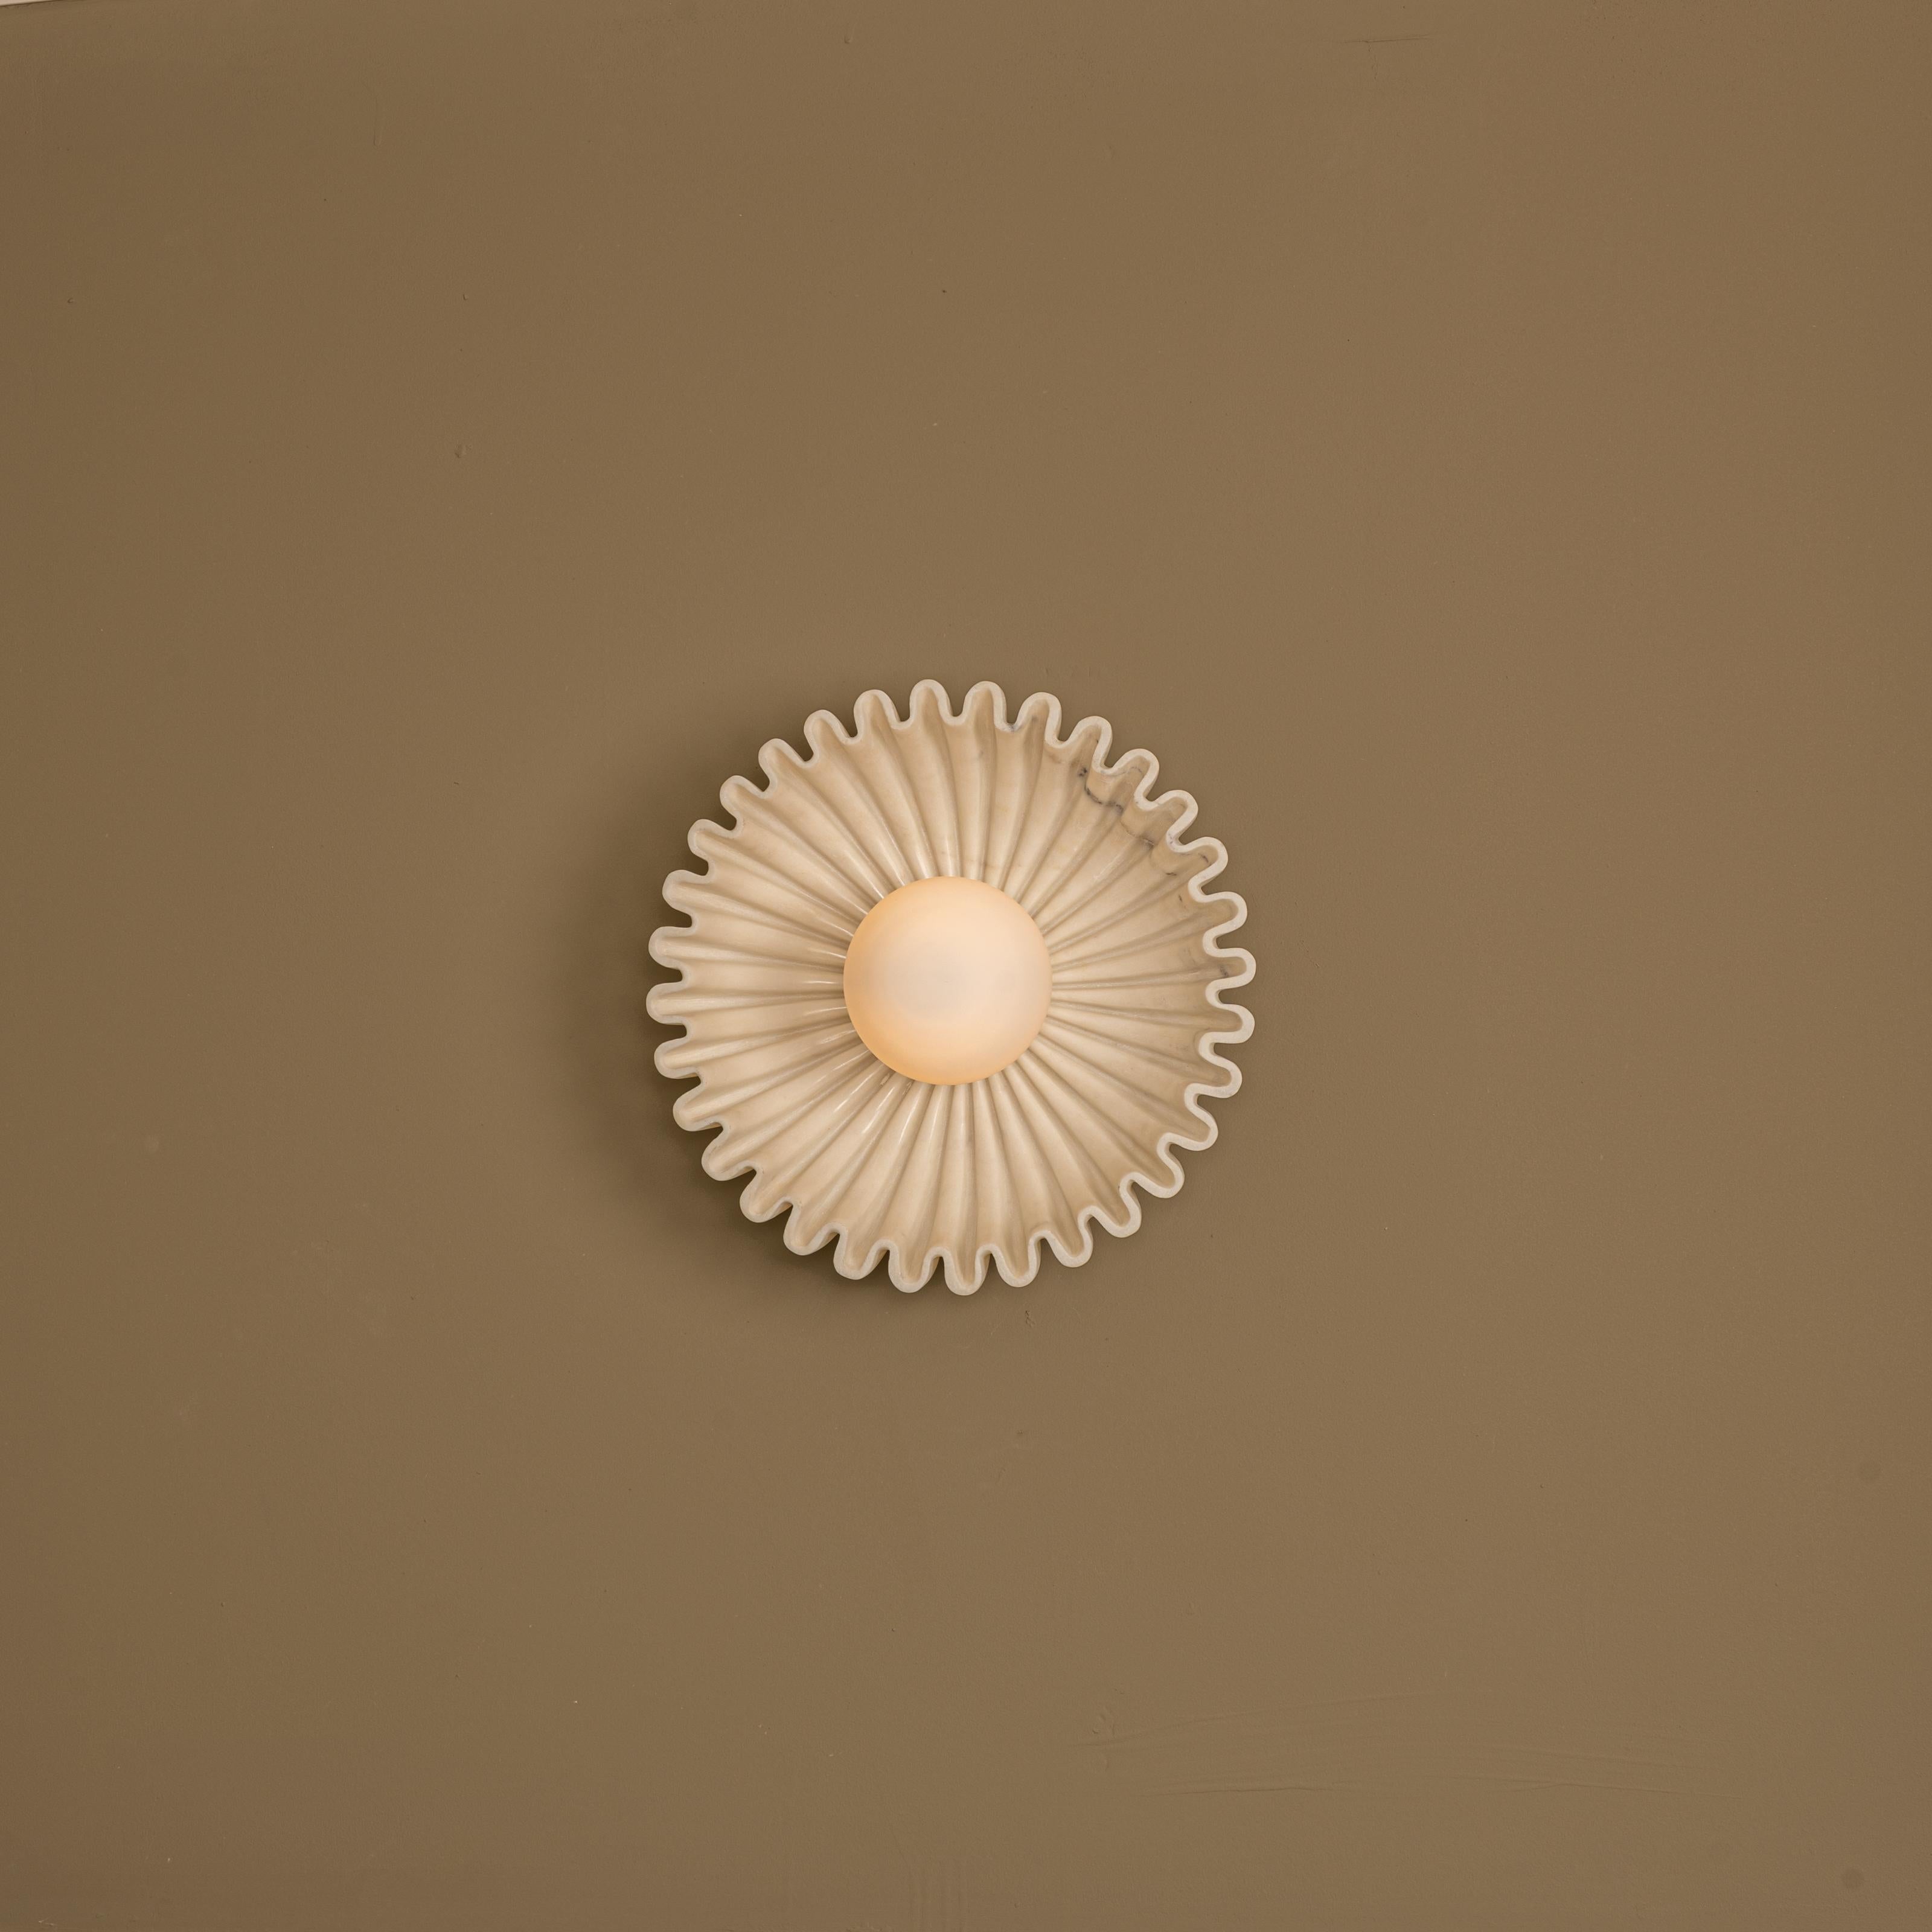 Ostro White Marble Wall Sconce by Simone & Marcel
Dimensions: D 15 x W 31 x H 31 cm.
Materials: Marble and glass.

Available in different ceramic and marble options and finishes. Custom options available on request. Please contact us. 

All our